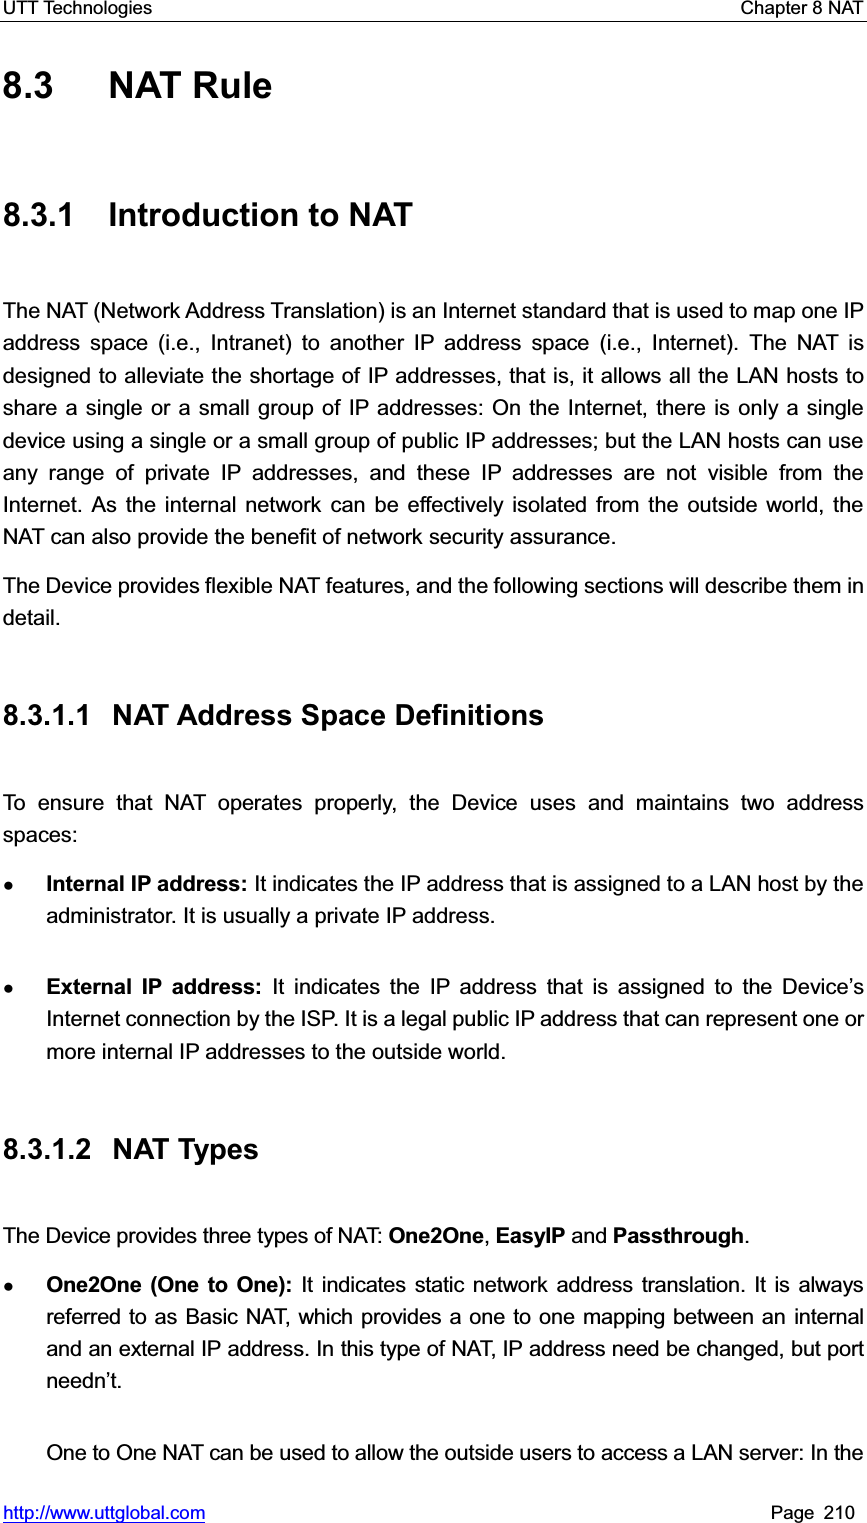 UTT Technologies    Chapter 8 NAT   http://www.uttglobal.com Page 210 8.3 NAT Rule 8.3.1 Introduction to NAT The NAT (Network Address Translation) is an Internet standard that is used to map one IP address space (i.e., Intranet) to another IP address space (i.e., Internet). The NAT is designed to alleviate the shortage of IP addresses, that is, it allows all the LAN hosts to share a single or a small group of IP addresses: On the Internet, there is only a single device using a single or a small group of public IP addresses; but the LAN hosts can use any range of private IP addresses, and these IP addresses are not visible from the Internet. As the internal network can be effectively isolated from the outside world, the NAT can also provide the benefit of network security assurance.   The Device provides flexible NAT features, and the following sections will describe them in detail.8.3.1.1 NAT Address Space Definitions To ensure that NAT operates properly, the Device uses and maintains two address spaces:  ƔInternal IP address: It indicates the IP address that is assigned to a LAN host by the administrator. It is usually a private IP address. ƔExternal IP address: It indicates the IP address that is assigned to the Device¶sInternet connection by the ISP. It is a legal public IP address that can represent one or more internal IP addresses to the outside world. 8.3.1.2 NAT Types The Device provides three types of NAT: One2One,EasyIP and Passthrough.ƔOne2One (One to One): It indicates static network address translation. It is always referred to as Basic NAT, which provides a one to one mapping between an internal and an external IP address. In this type of NAT, IP address need be changed, but port needn¶t.One to One NAT can be used to allow the outside users to access a LAN server: In the 